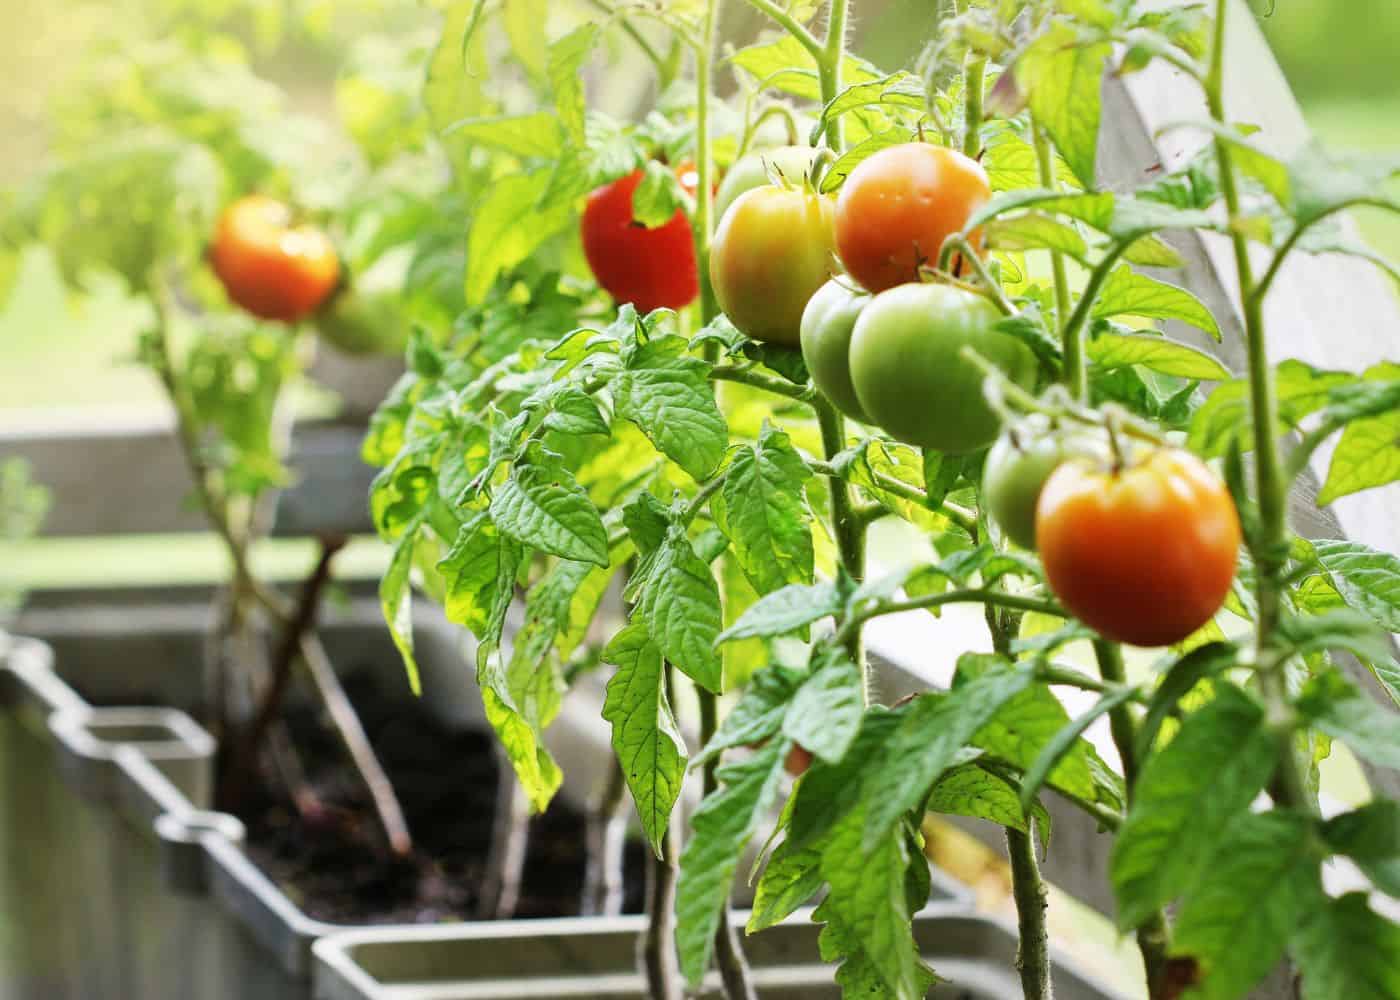 Tomato plants growing in containers on a deck